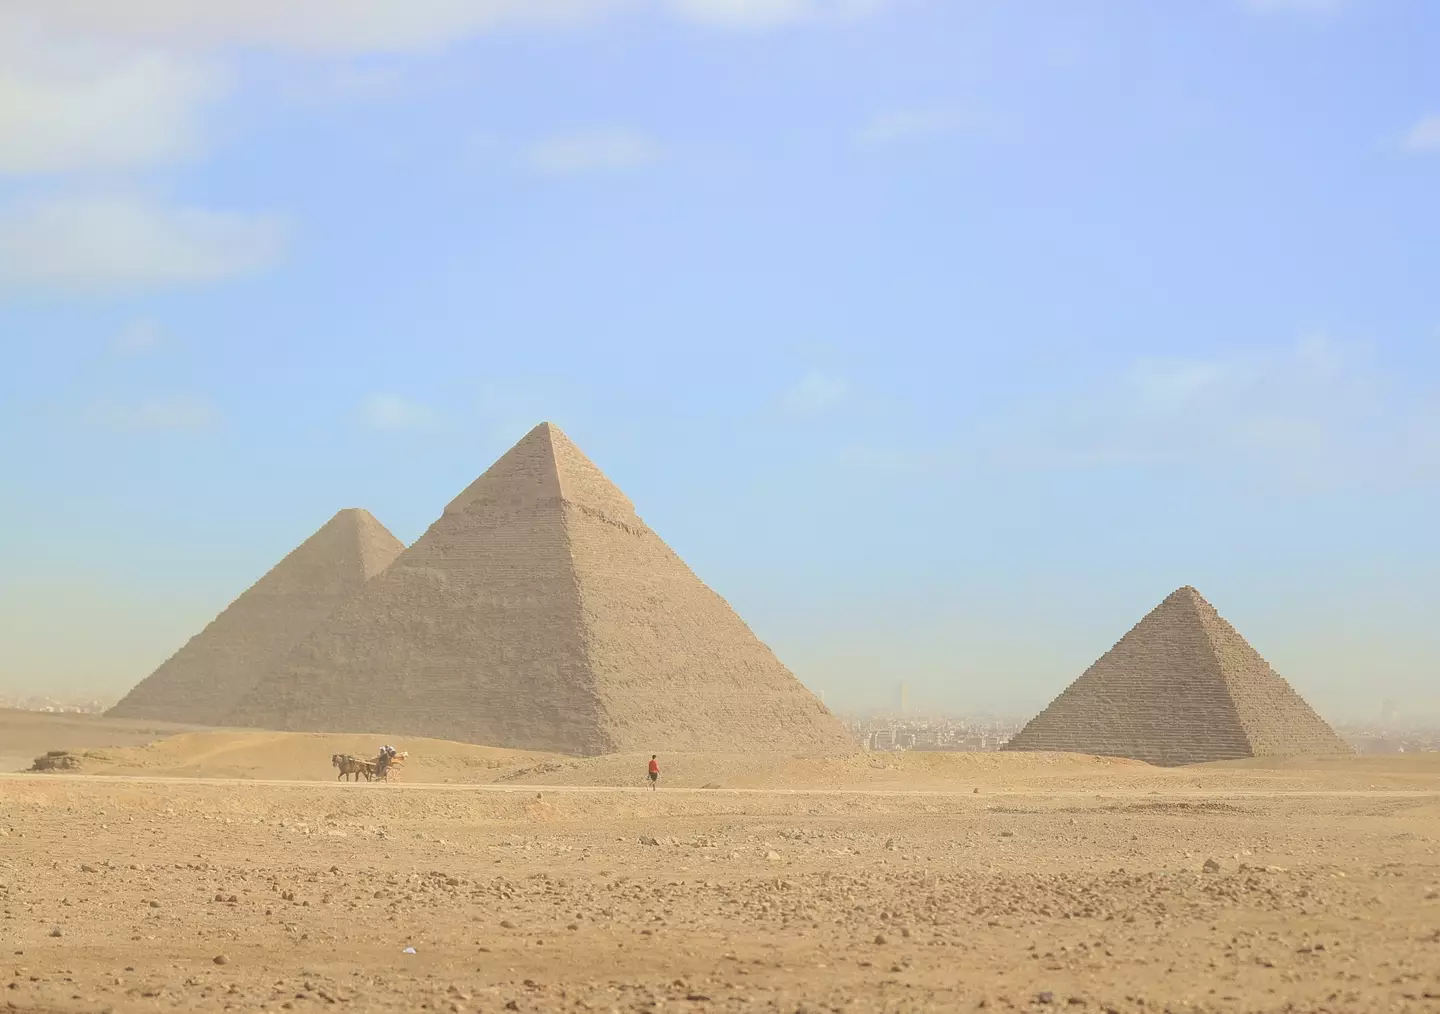 The Great Pyramid of Giza is the only wonder of the ancient world still standing.